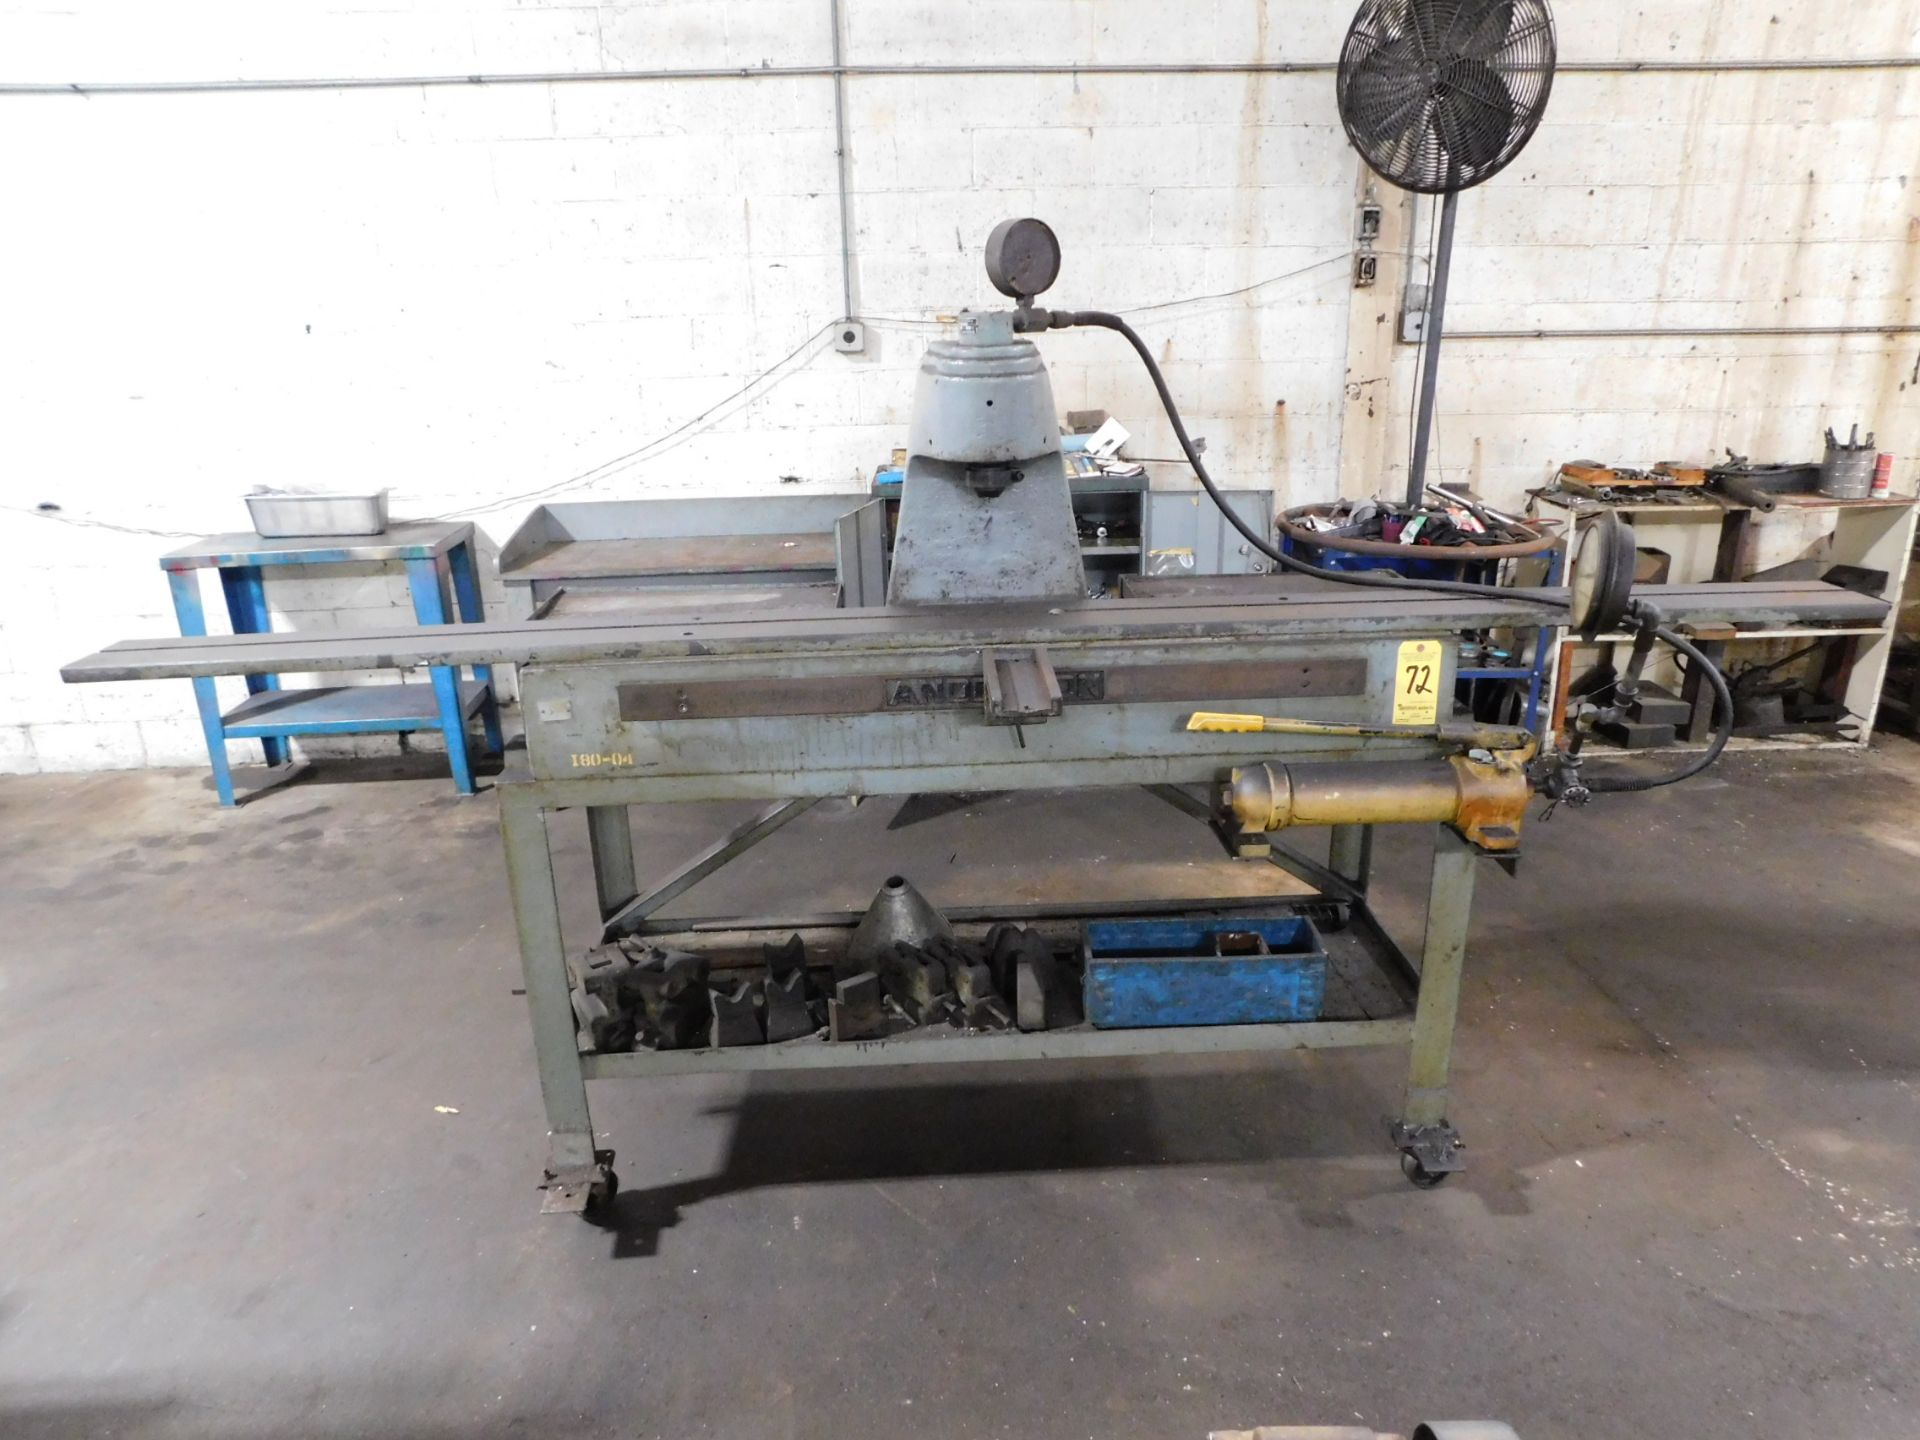 Anderson Hand Operated Hydraulic Straightening Press, Estimated 20 Ton, 7" X 120" Table, with